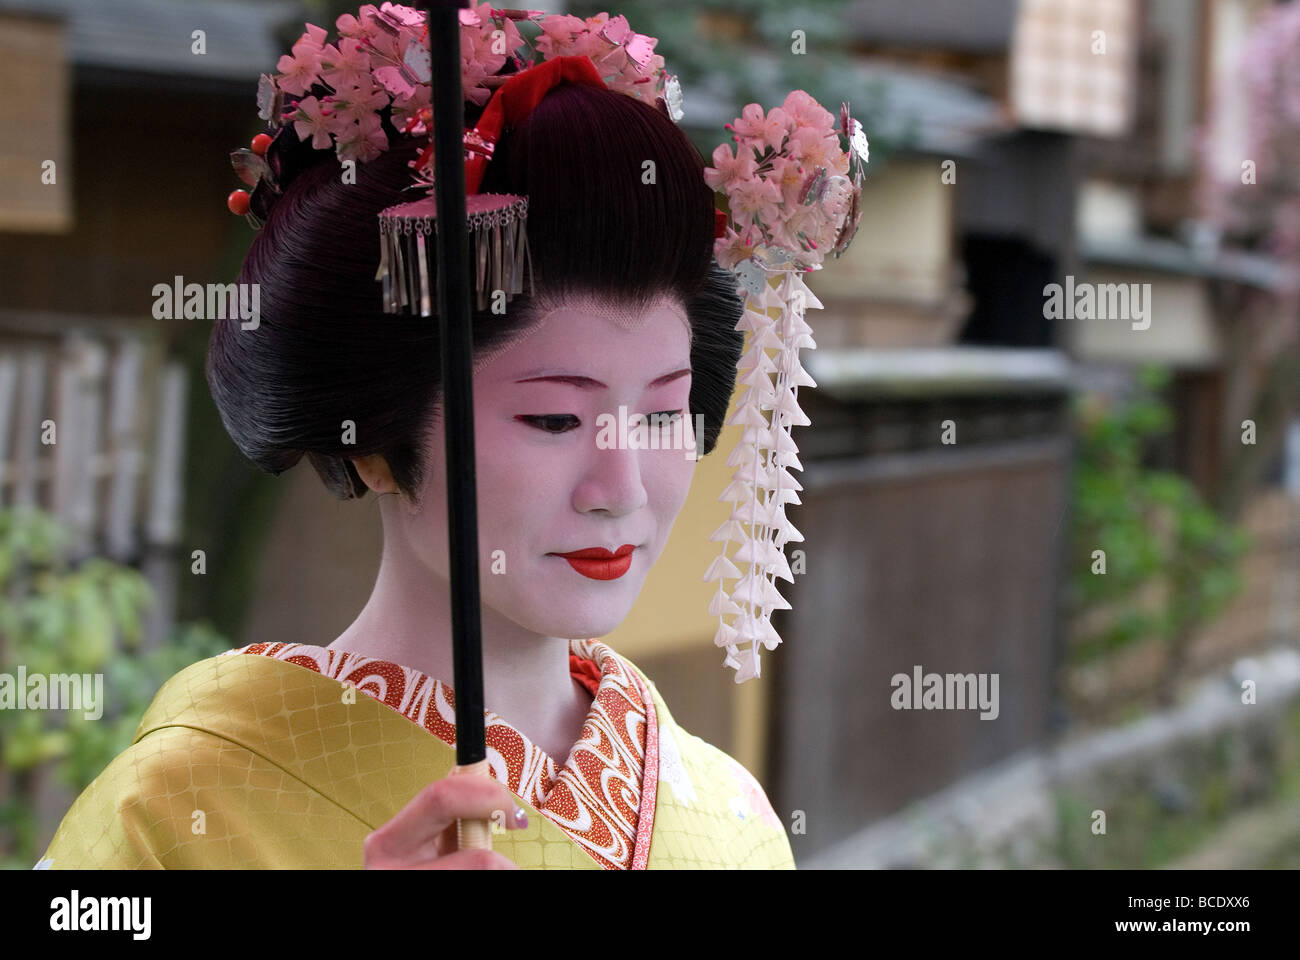 A female tourist dressed as a maiko or geisha apprentice with spring kanzashi decorations in her hair has a quiet moment Stock Photo